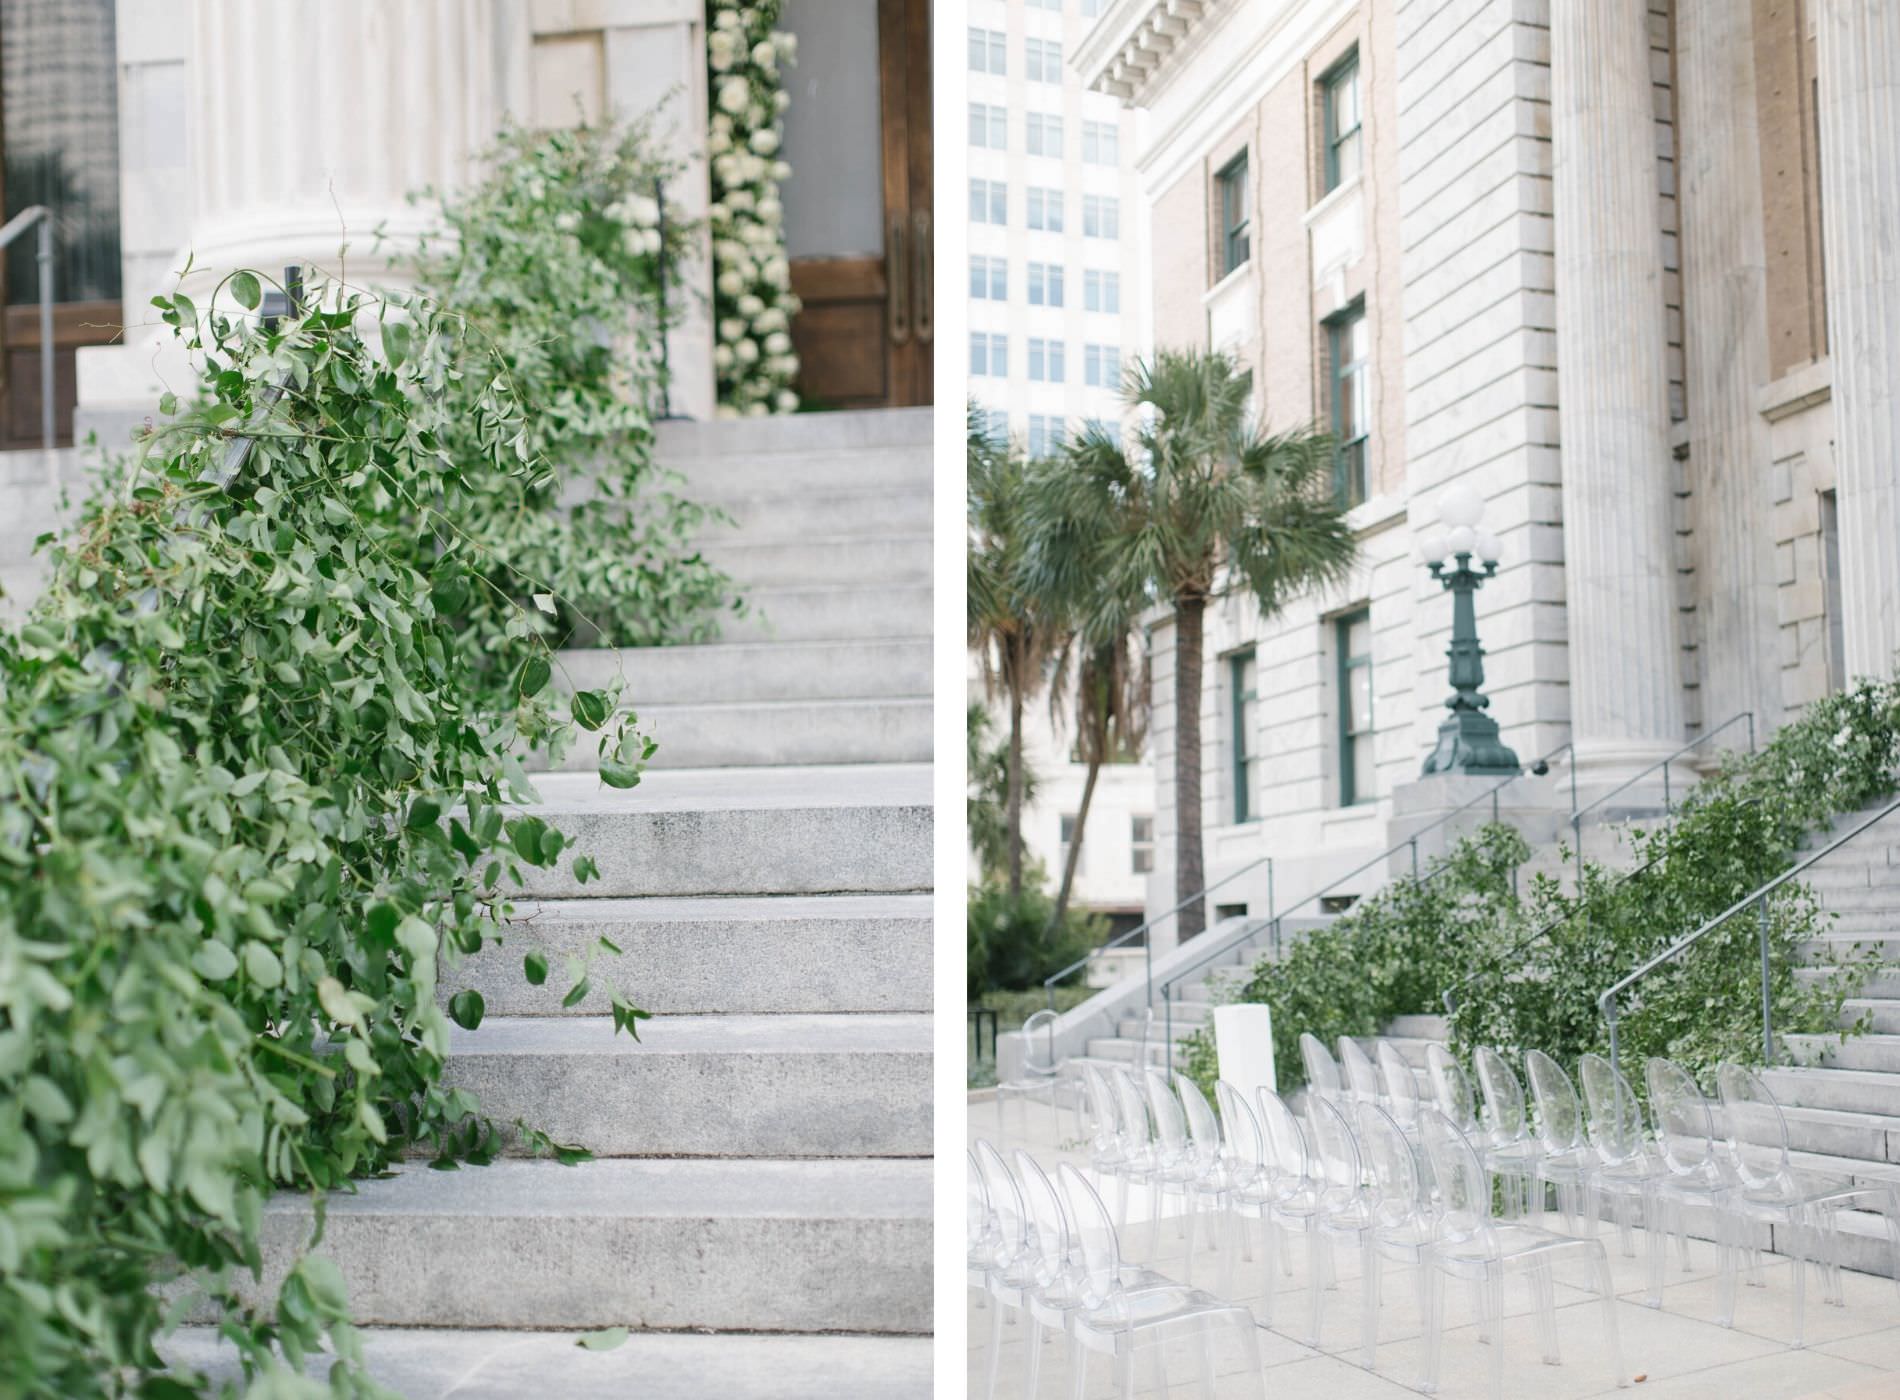 Garden Inspired Wedding Ceremony Decor on Stairs at Historic Downtown Courthouse Hotel Wedding Venue Le Meridien Tampa, Ghost Acrylic Chairs | Wedding Planner Parties A'la Carte | Wedding Rentals A Chair Affair